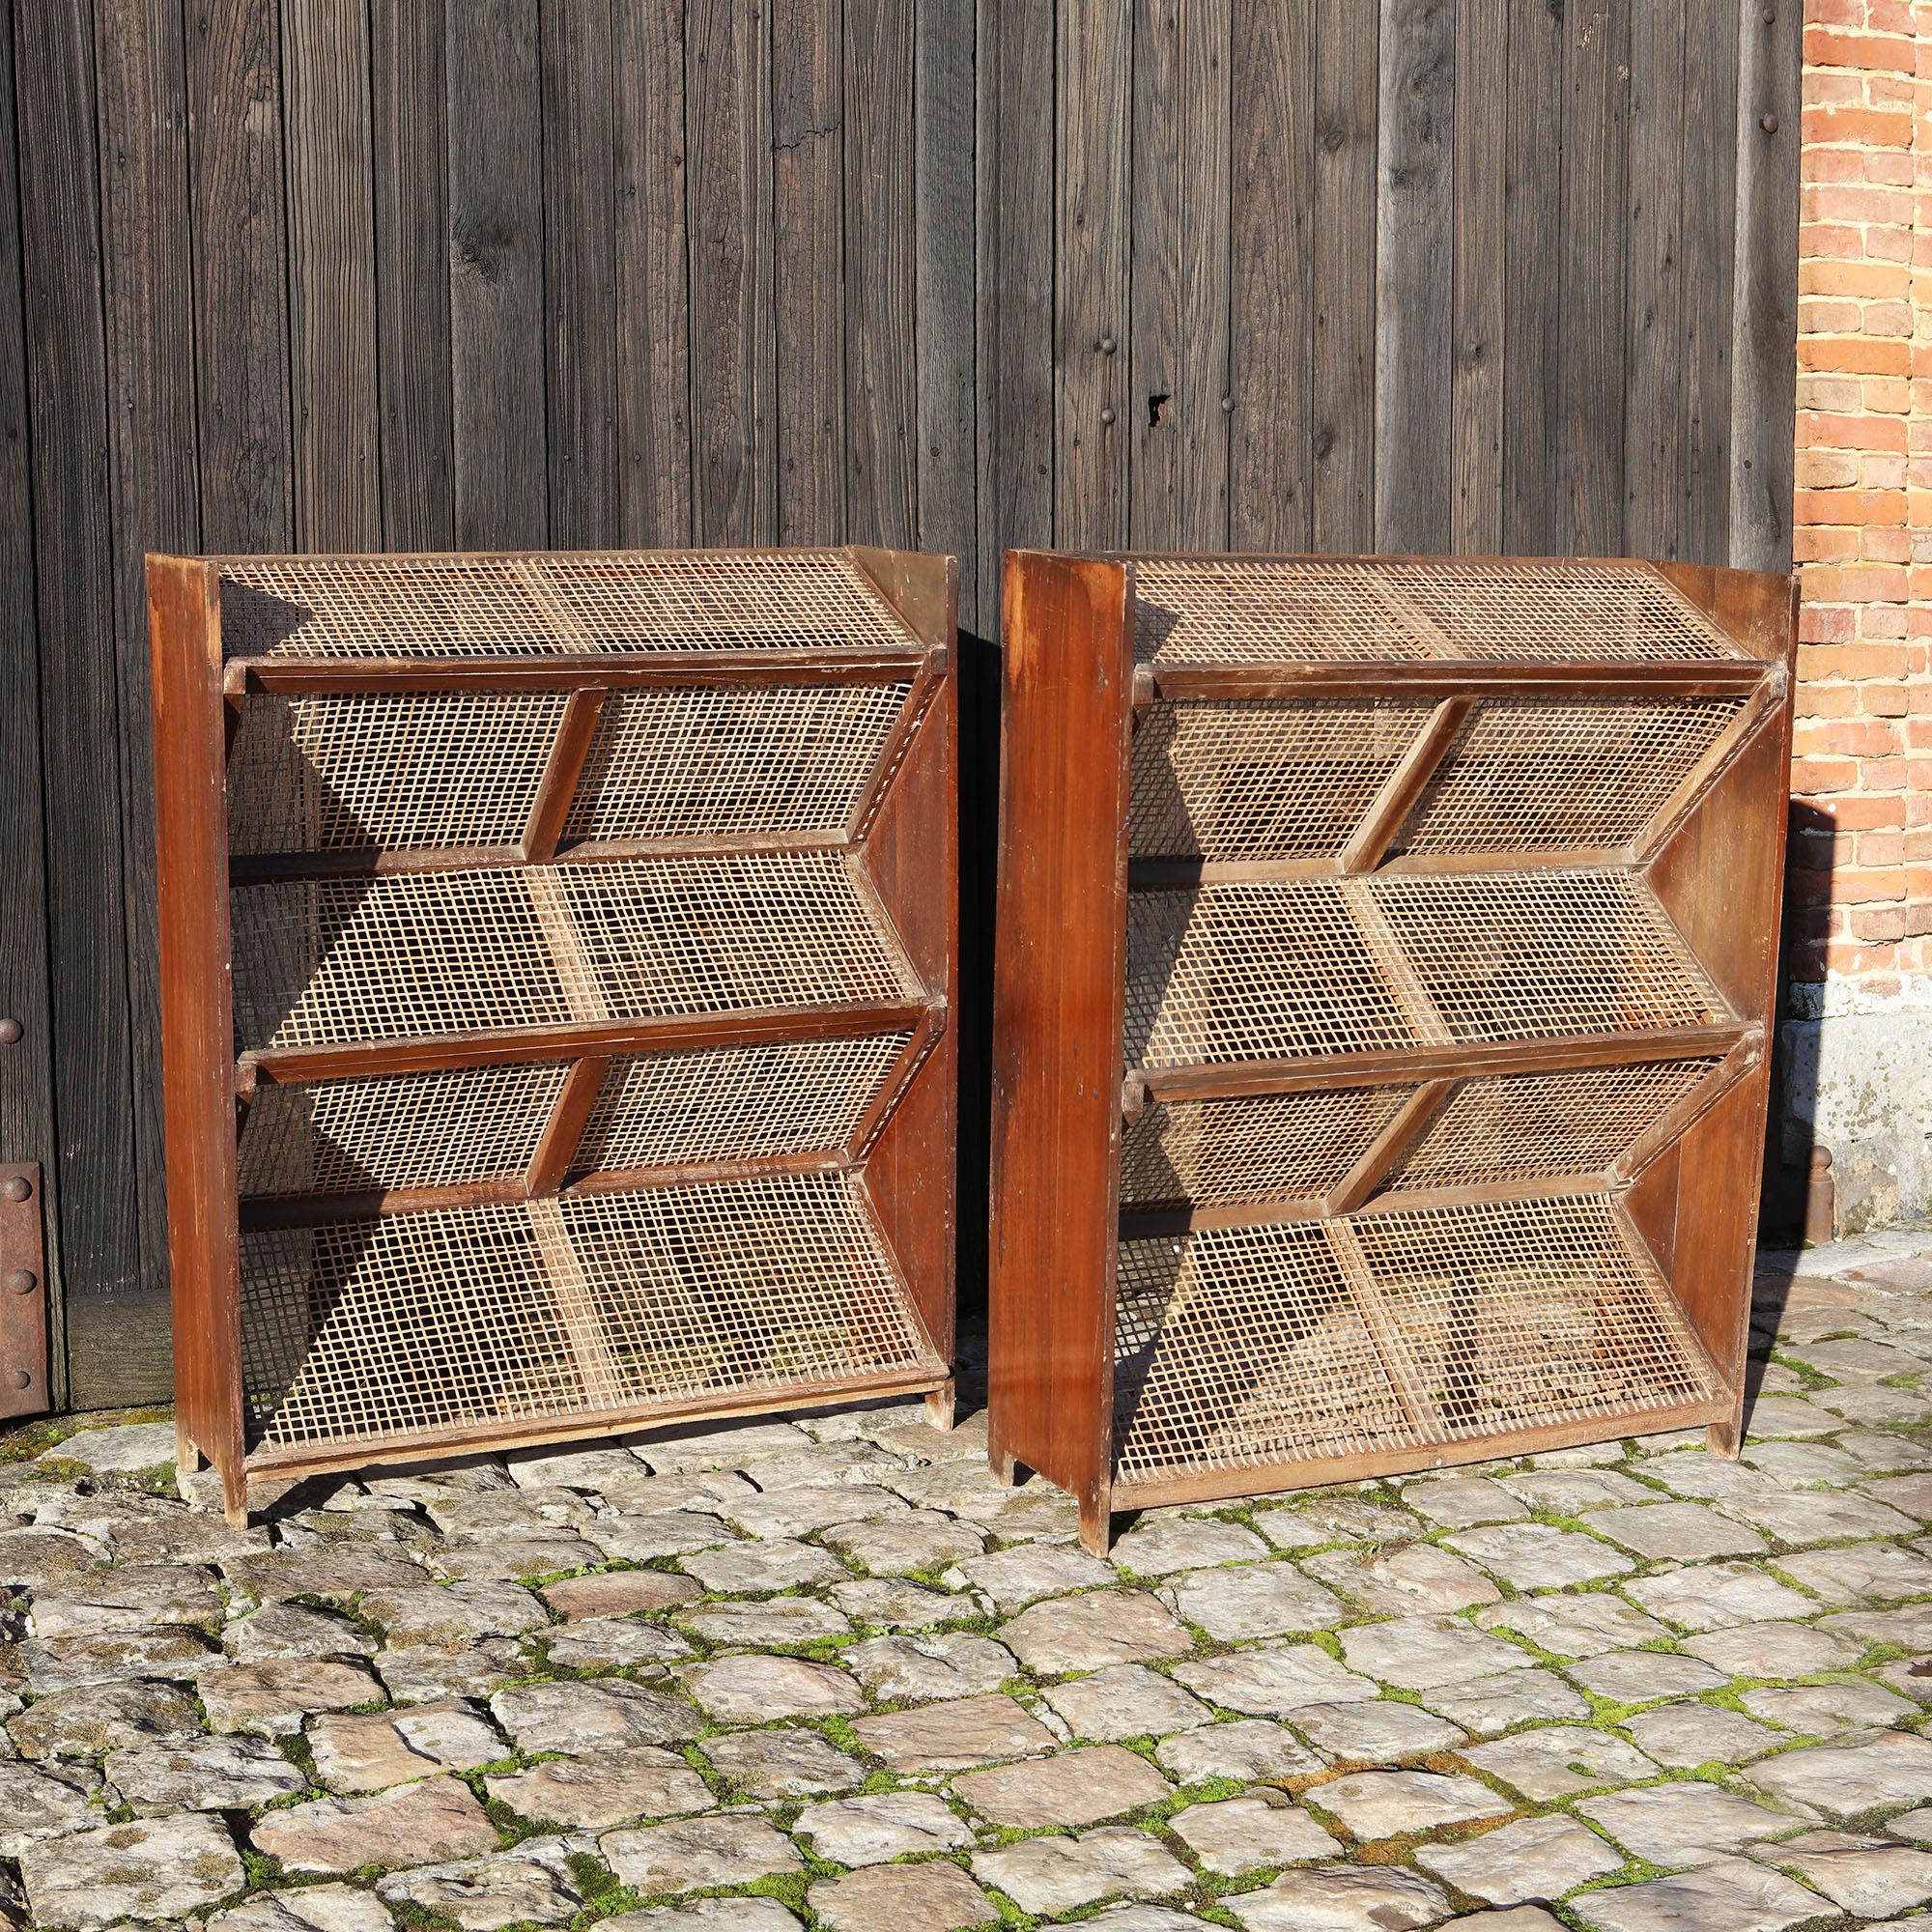 Art Deco Pair of Teak and Cane Magazine Racks by Pierre Jeanneret for Chandigarh, India